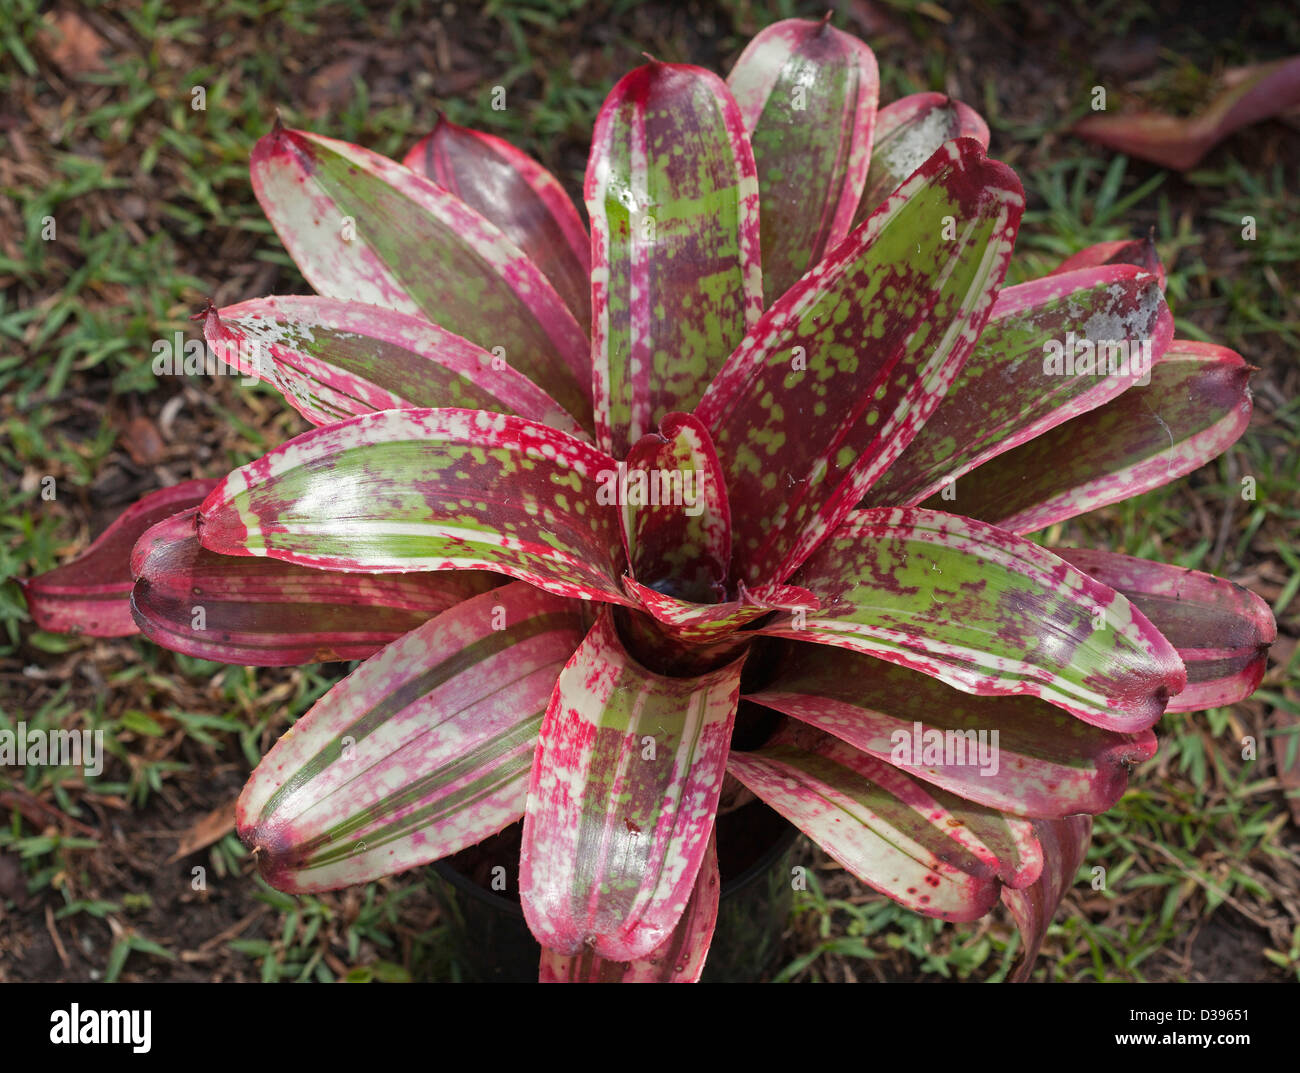 A spectacular bromeliad - Neoregelia cultivar 'Wild Gossip' - with green and white variegated leaves splashed with blood red Stock Photo